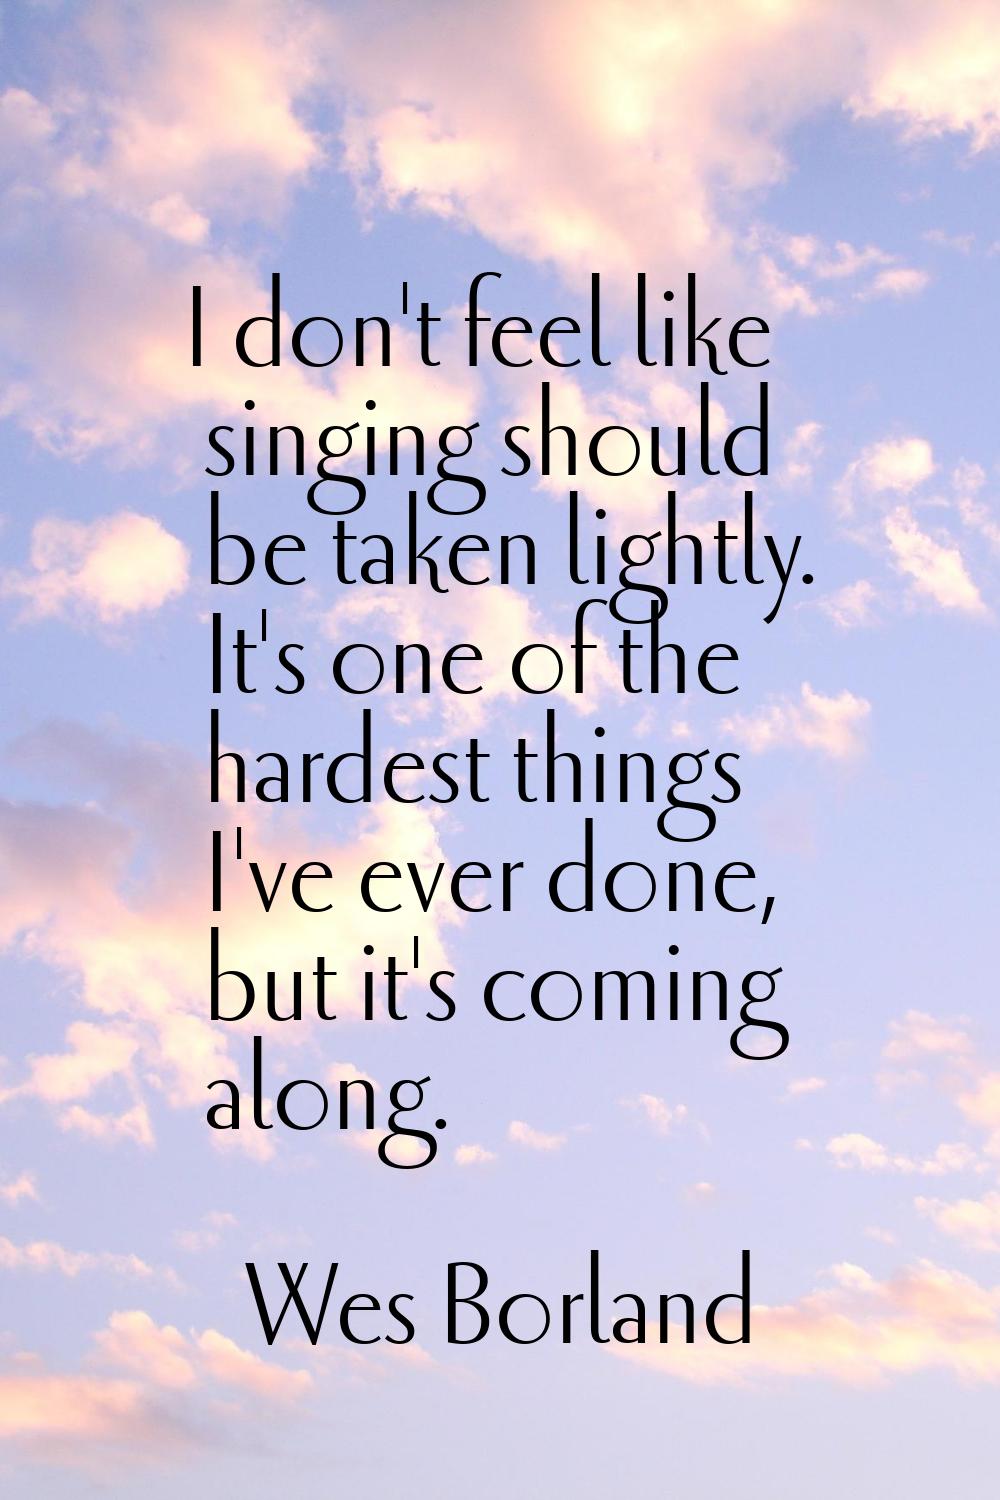 I don't feel like singing should be taken lightly. It's one of the hardest things I've ever done, b